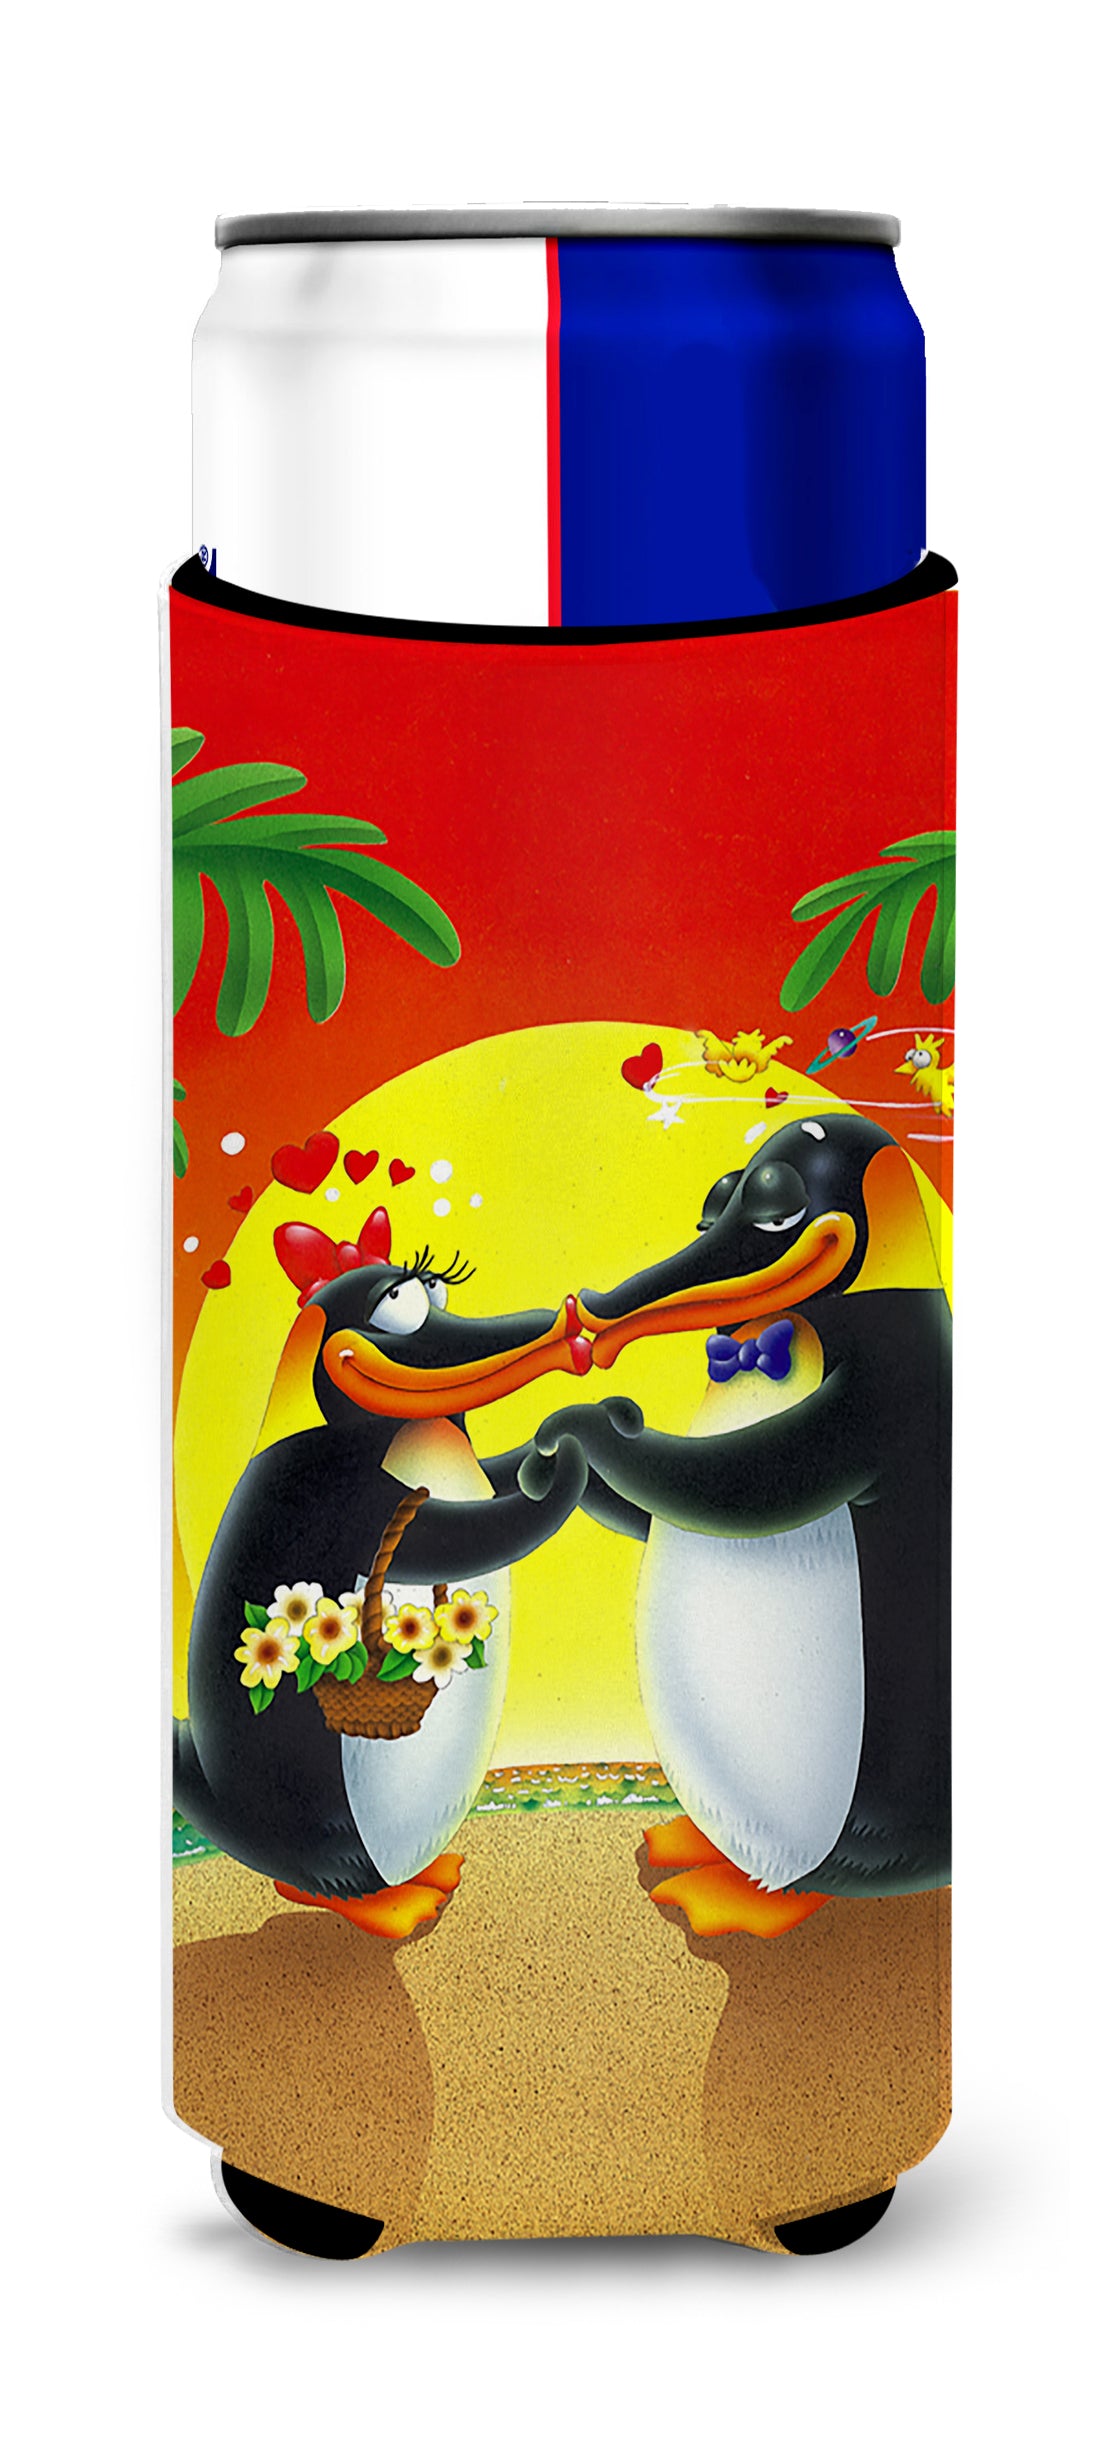 In Love Valentine's Day Penguins  Ultra Beverage Insulators for slim cans APH0245MUK